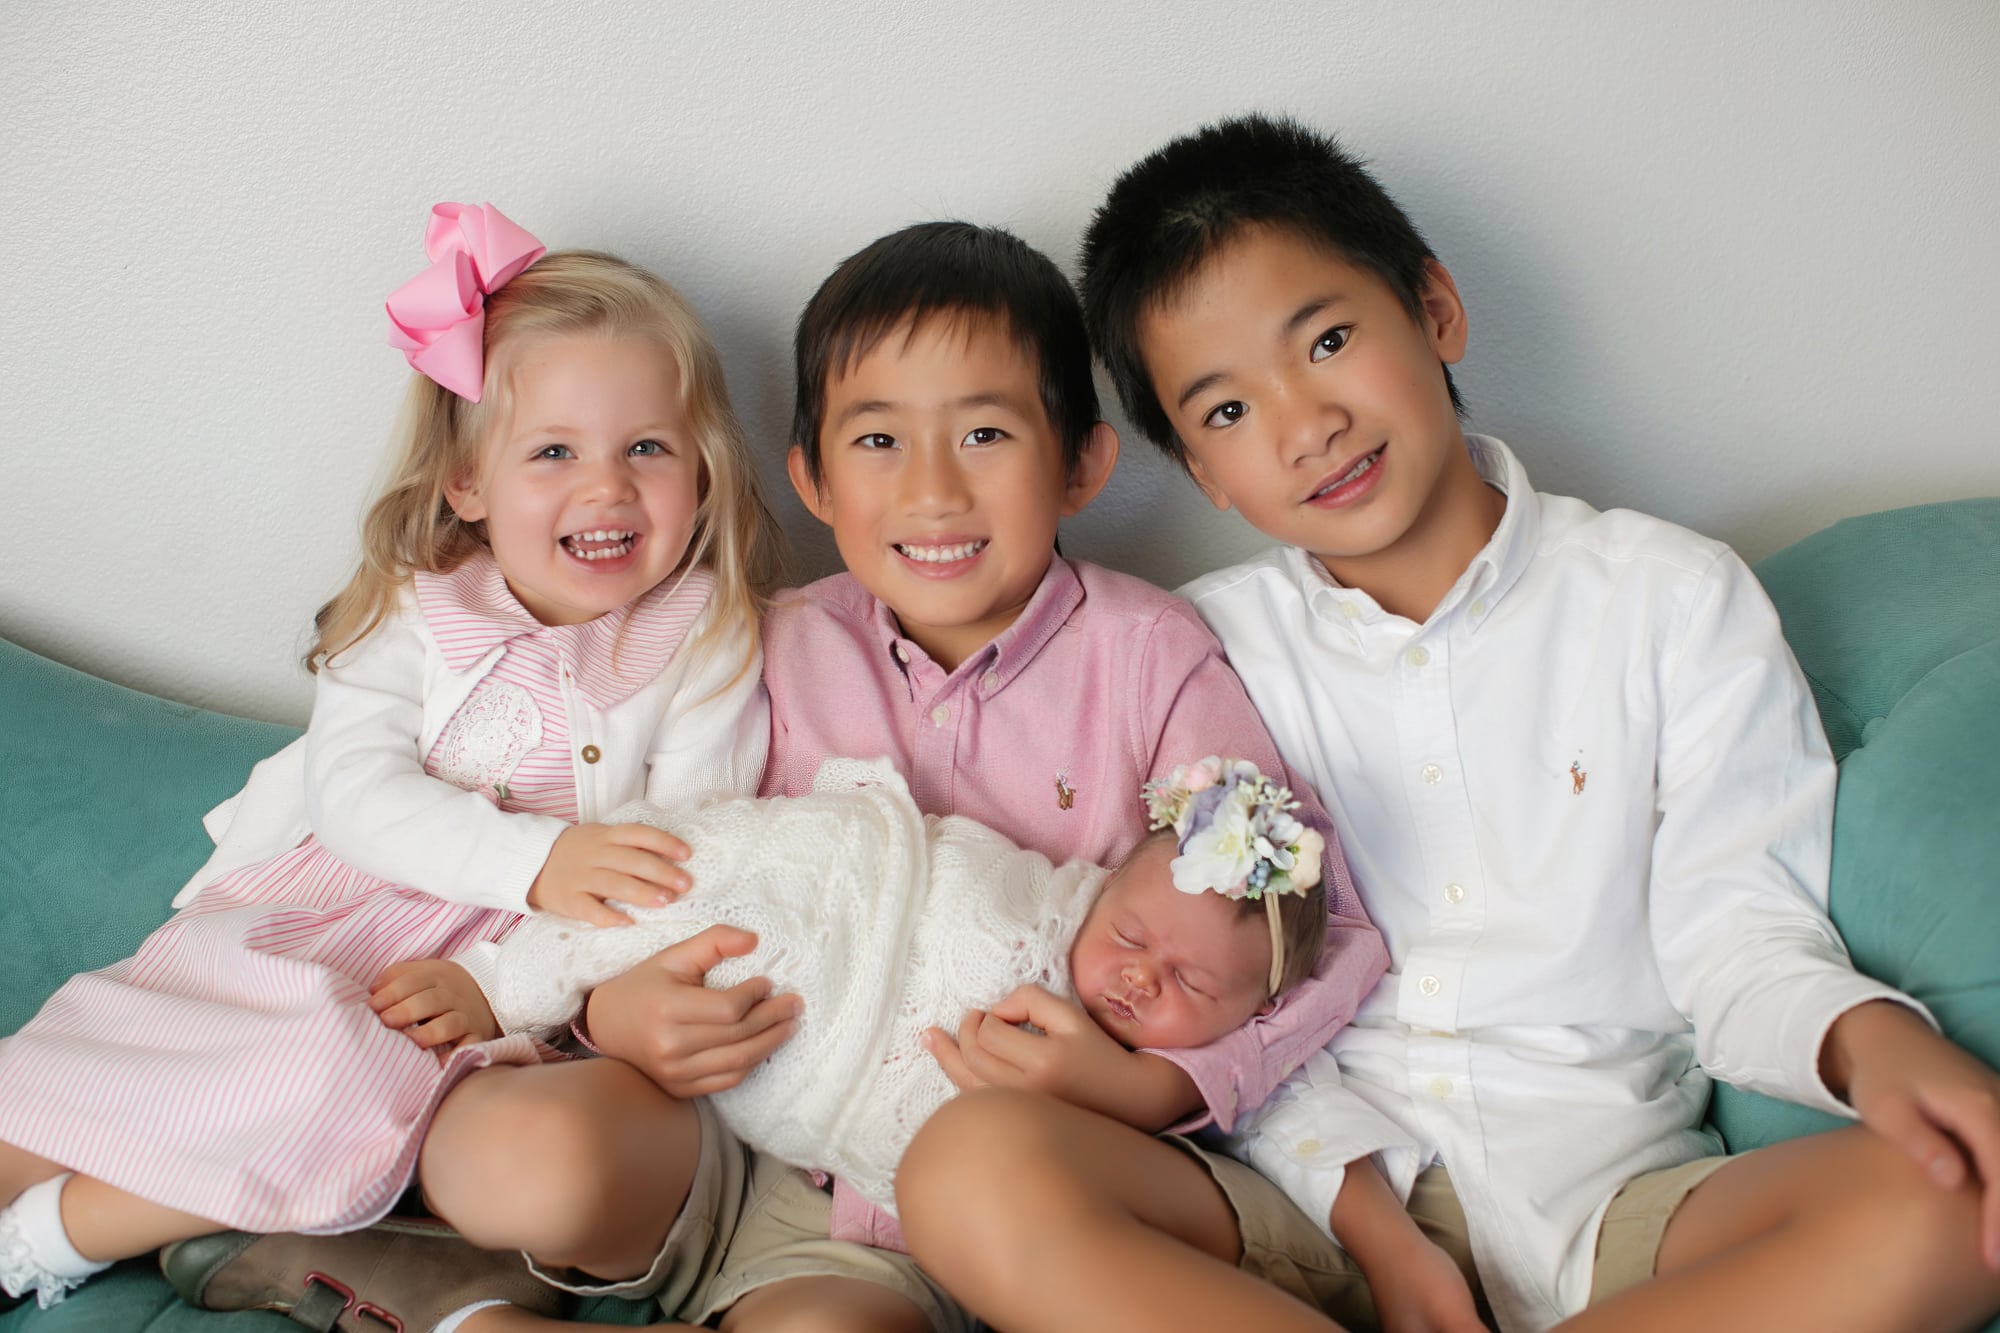 North County Newborn Photography of Sibling photos with baby